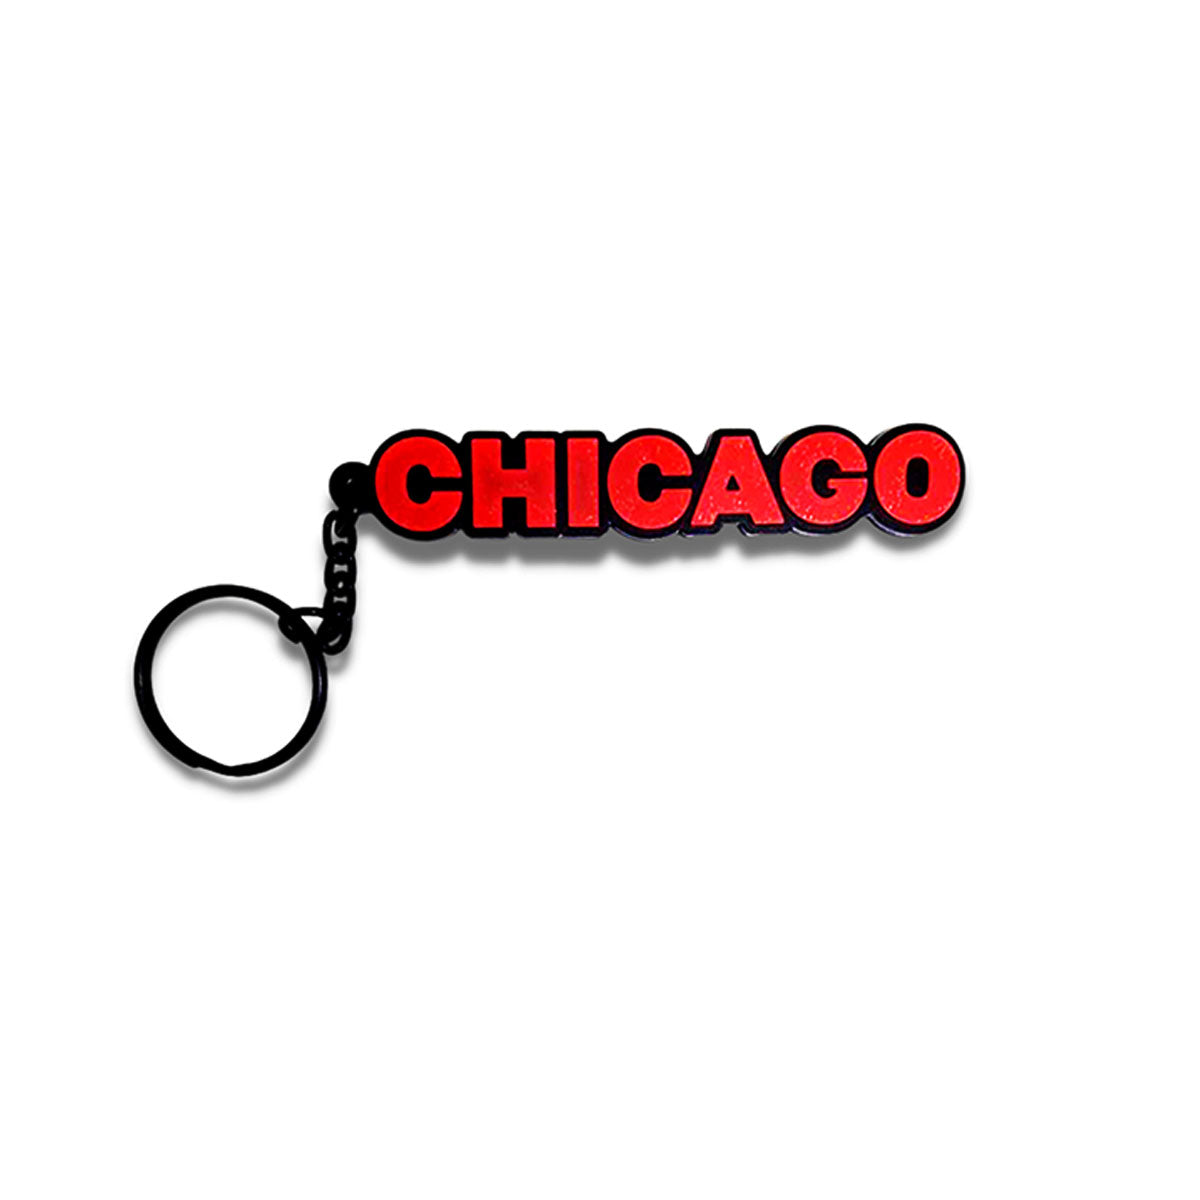 Chicago Rubber Keychain Image